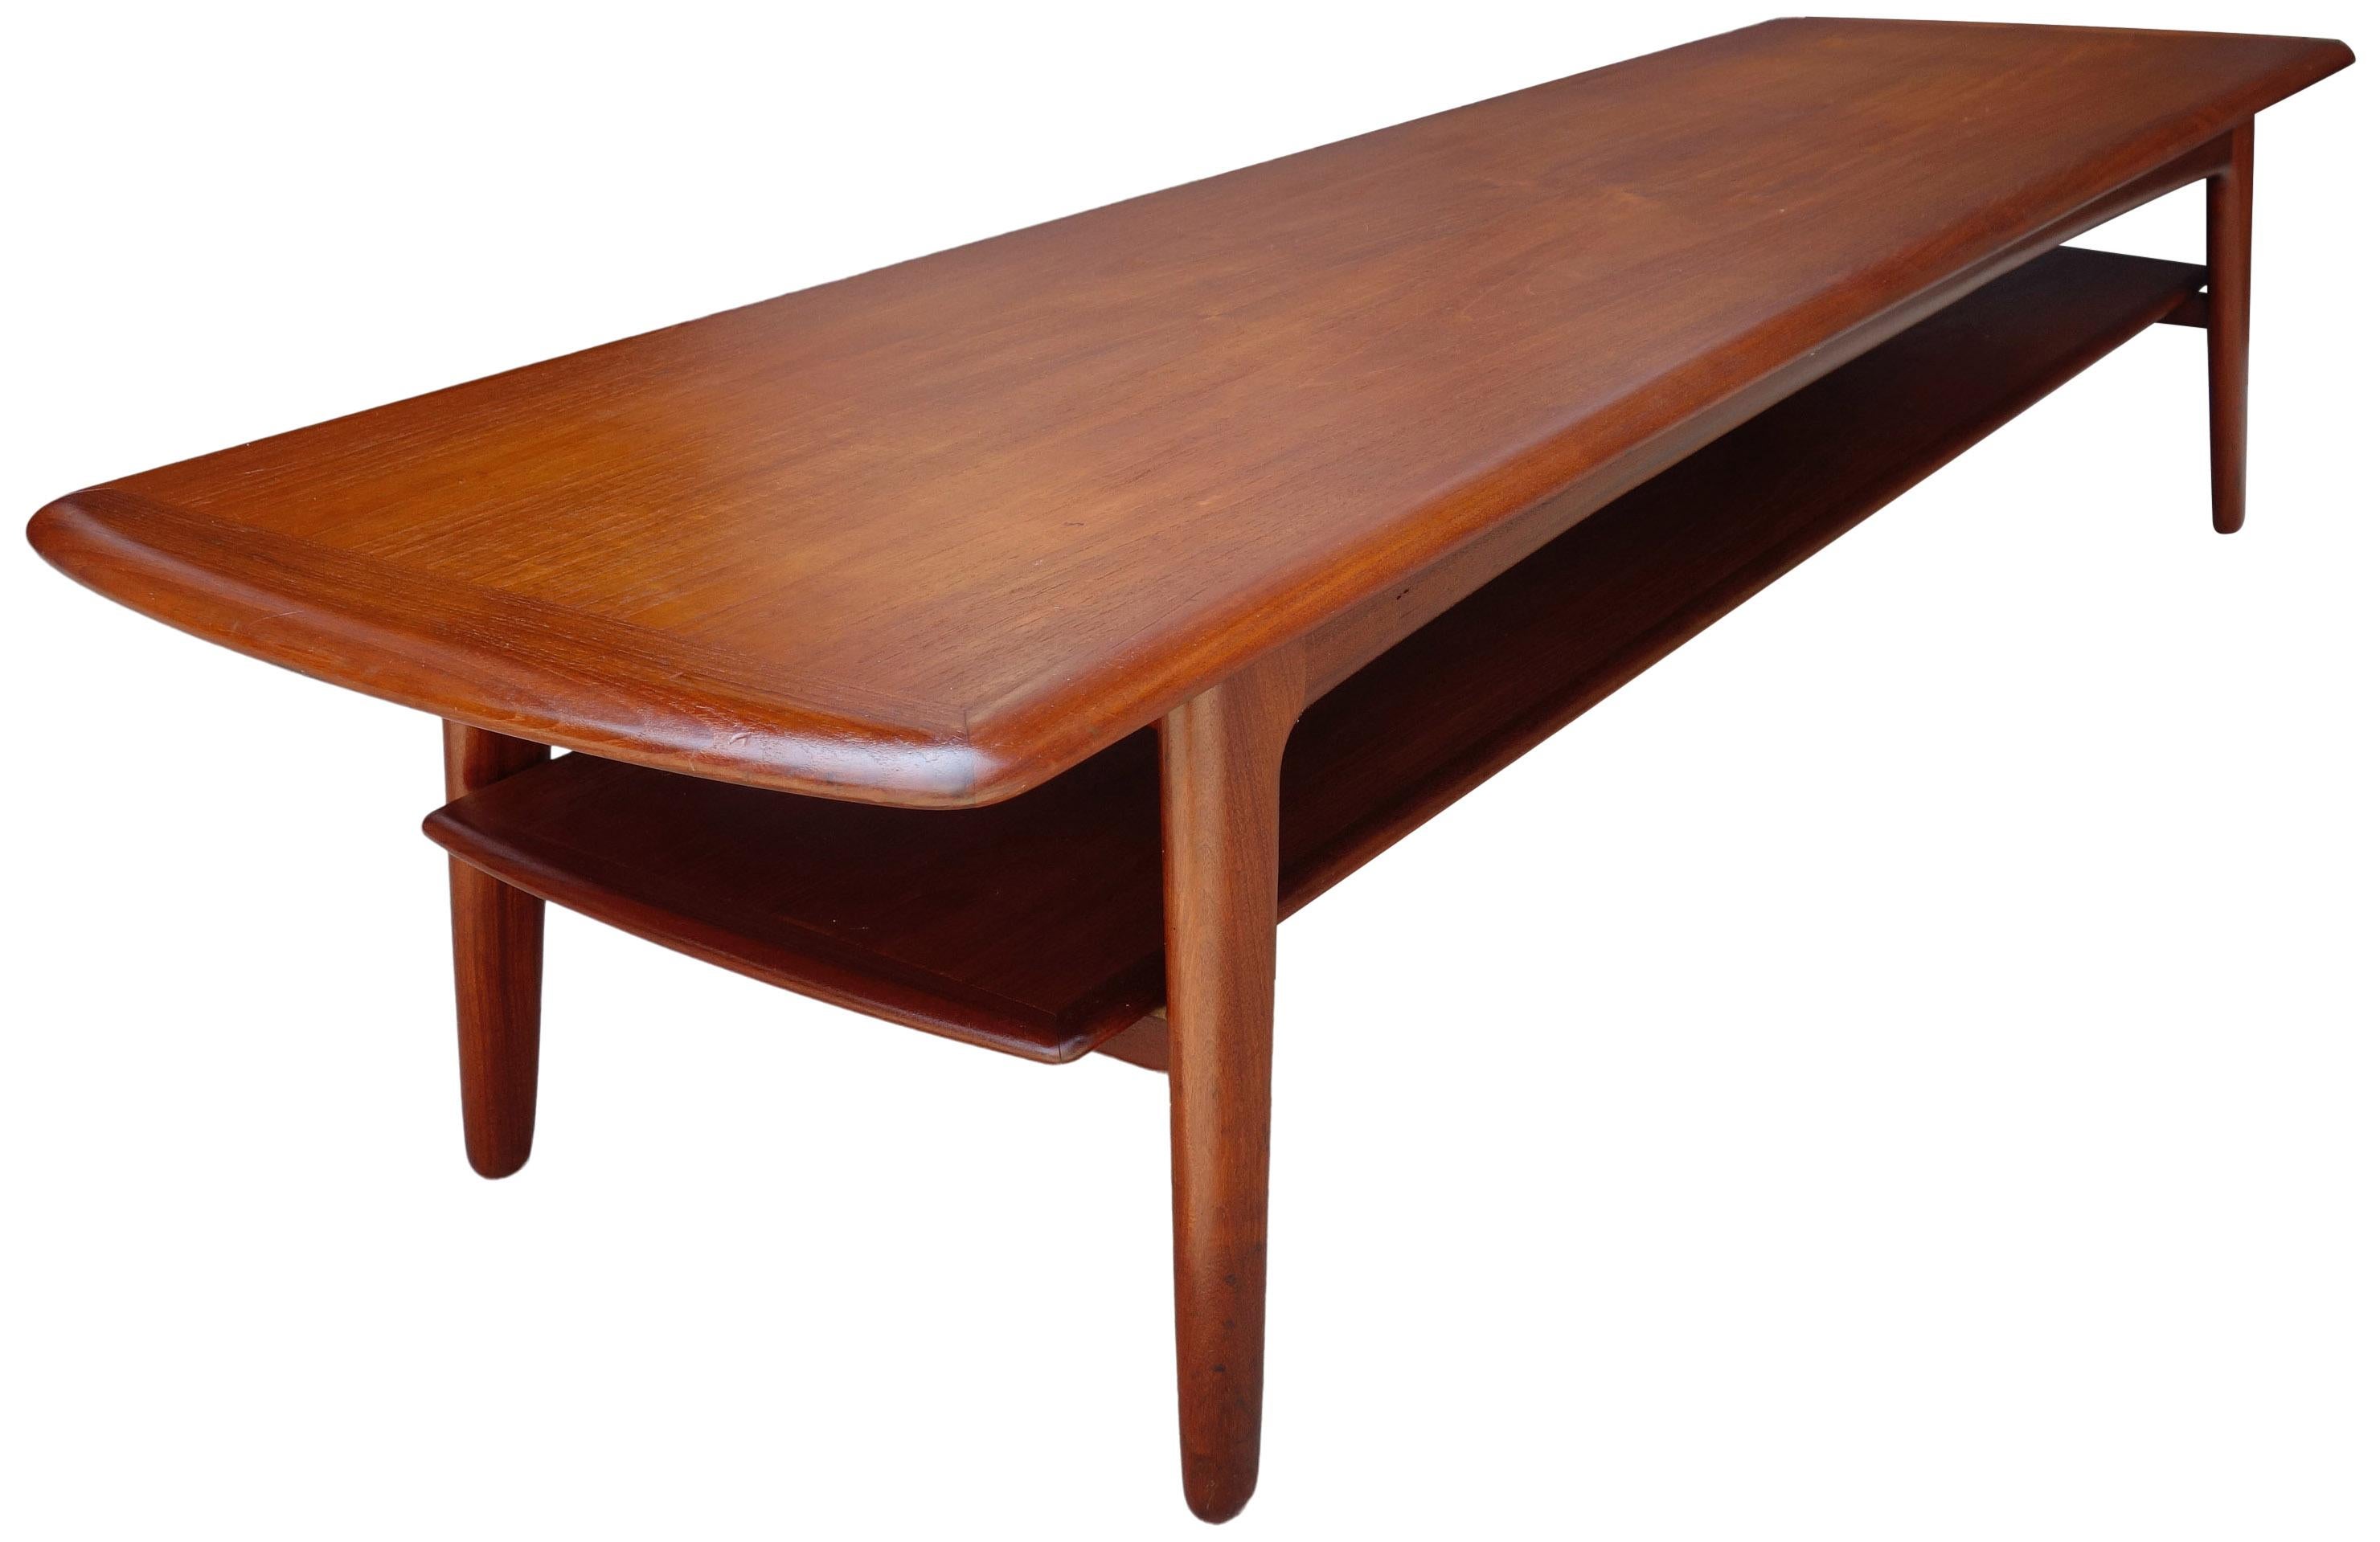 20th Century Monumental Scandinavian Coffee Table by Svend Aage Madsen For Sale